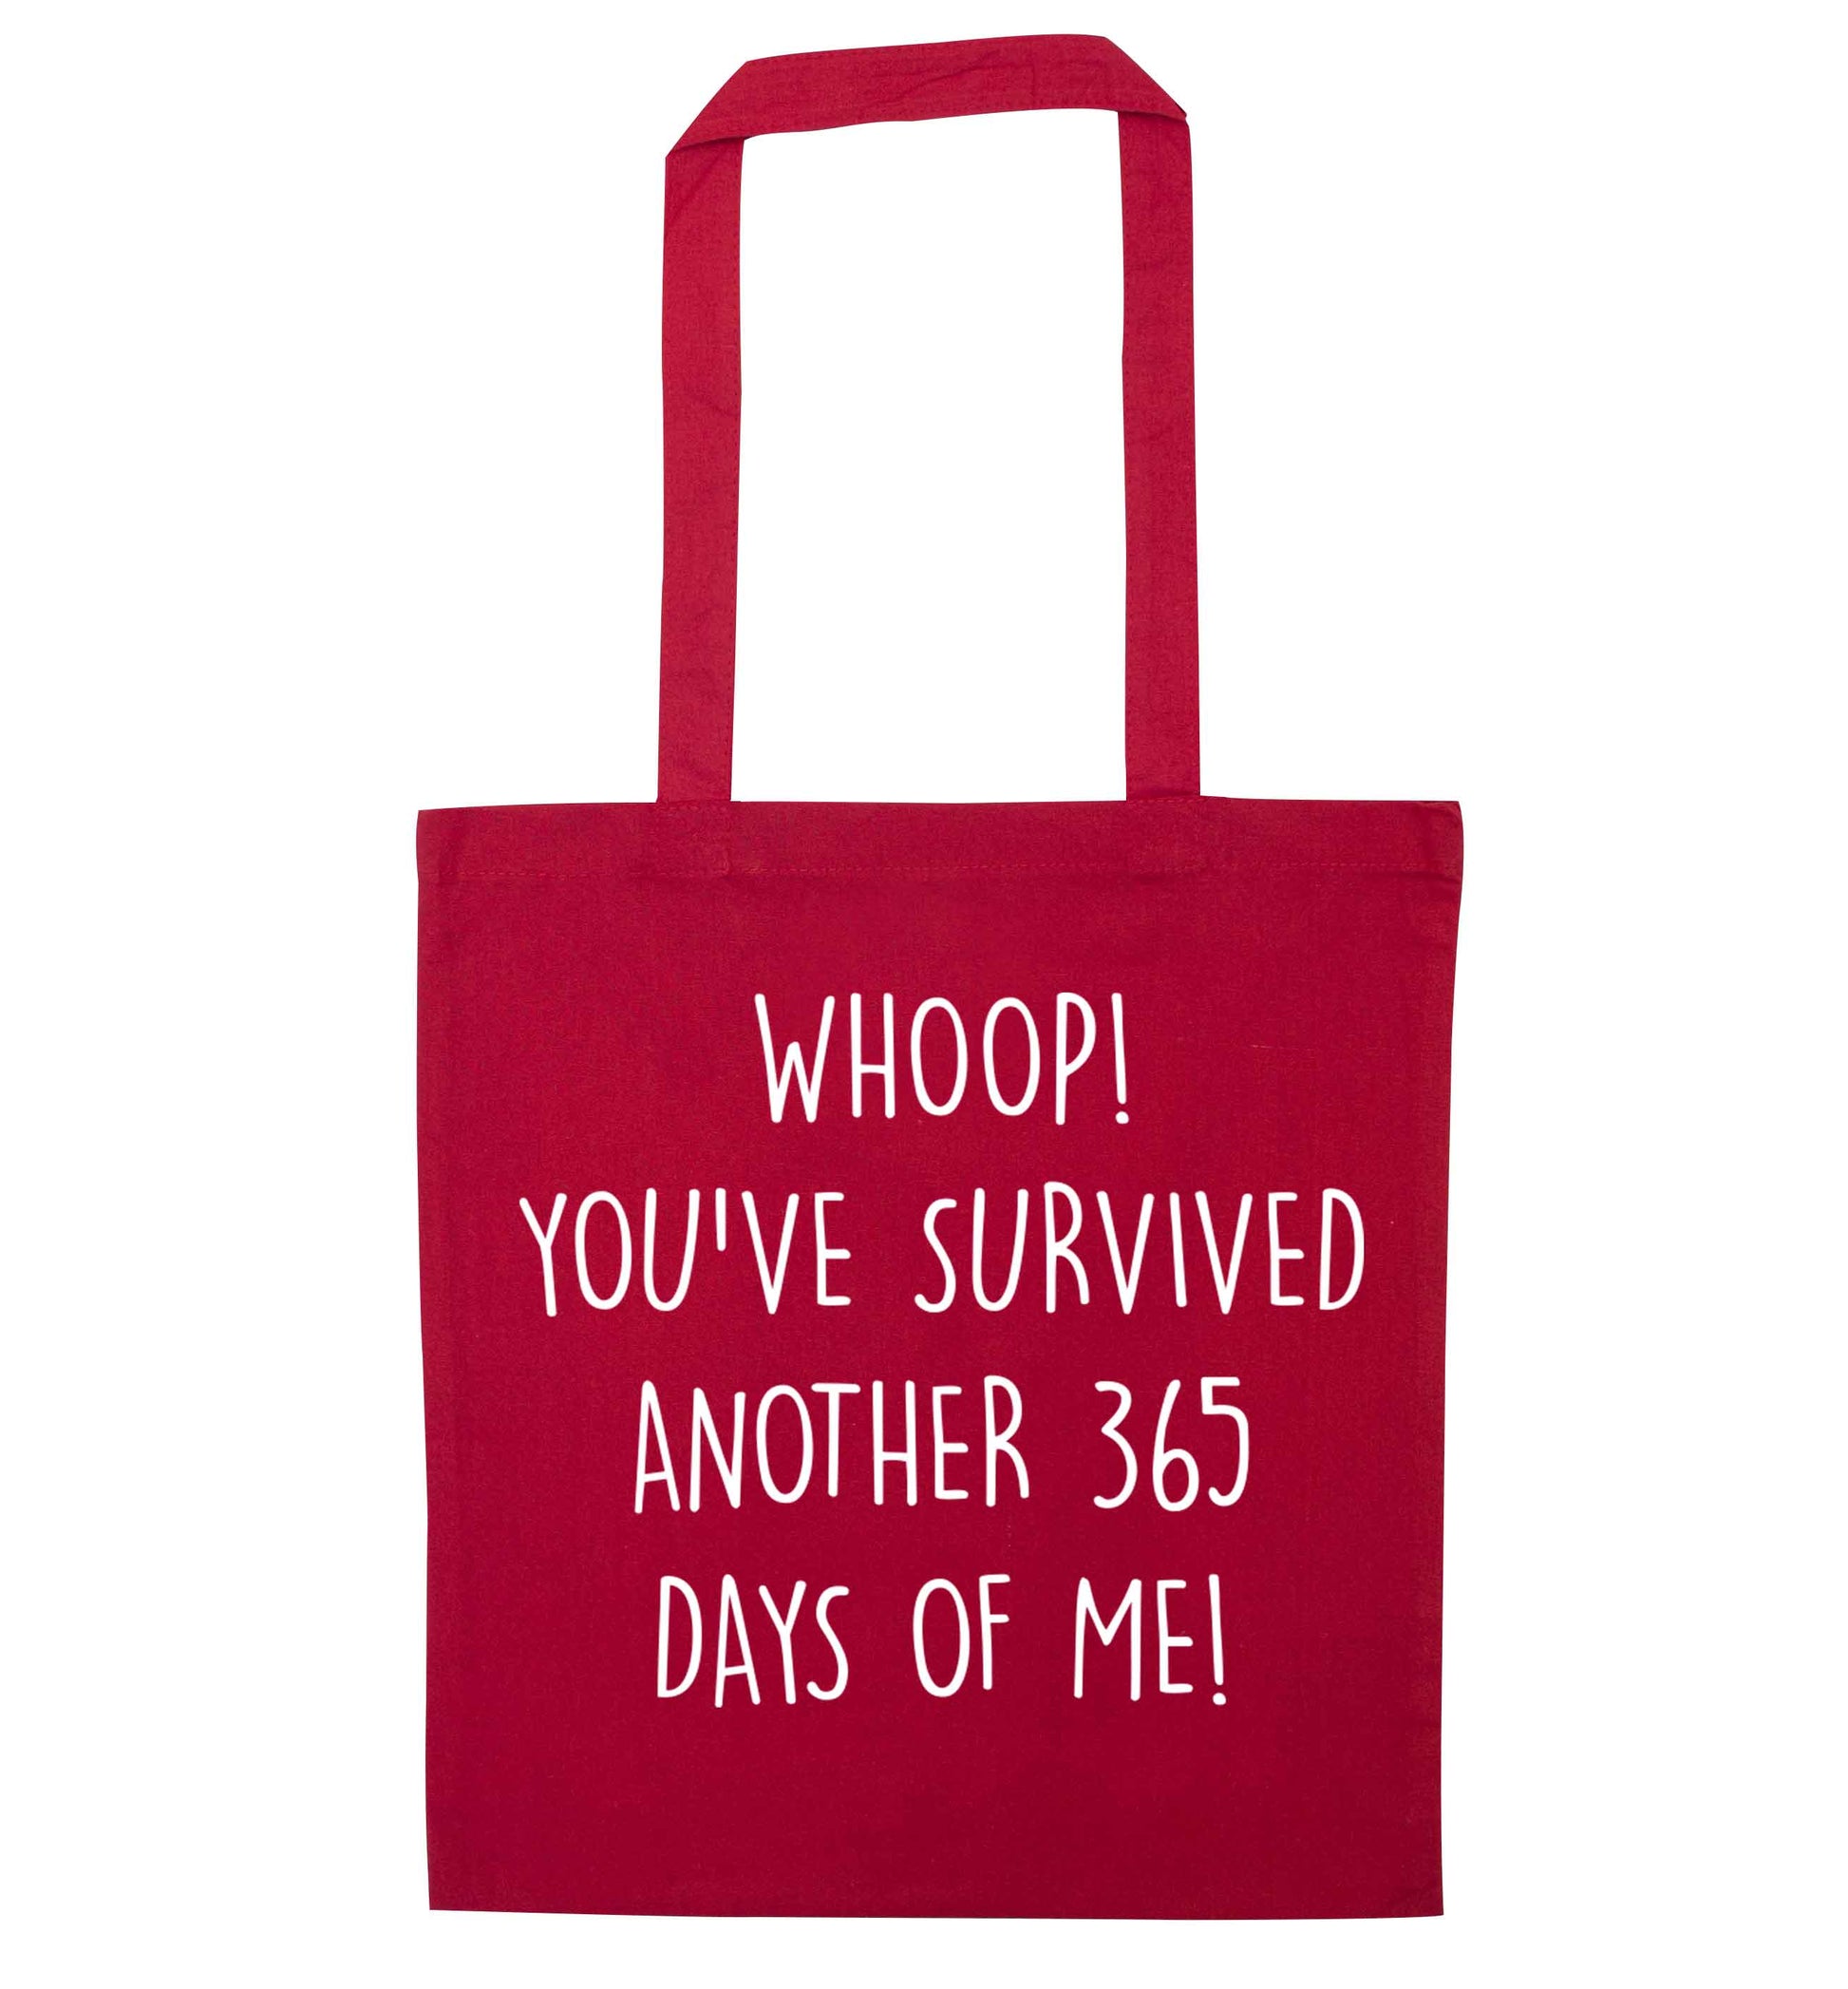 Whoop! You've survived another 365 days with me! red tote bag